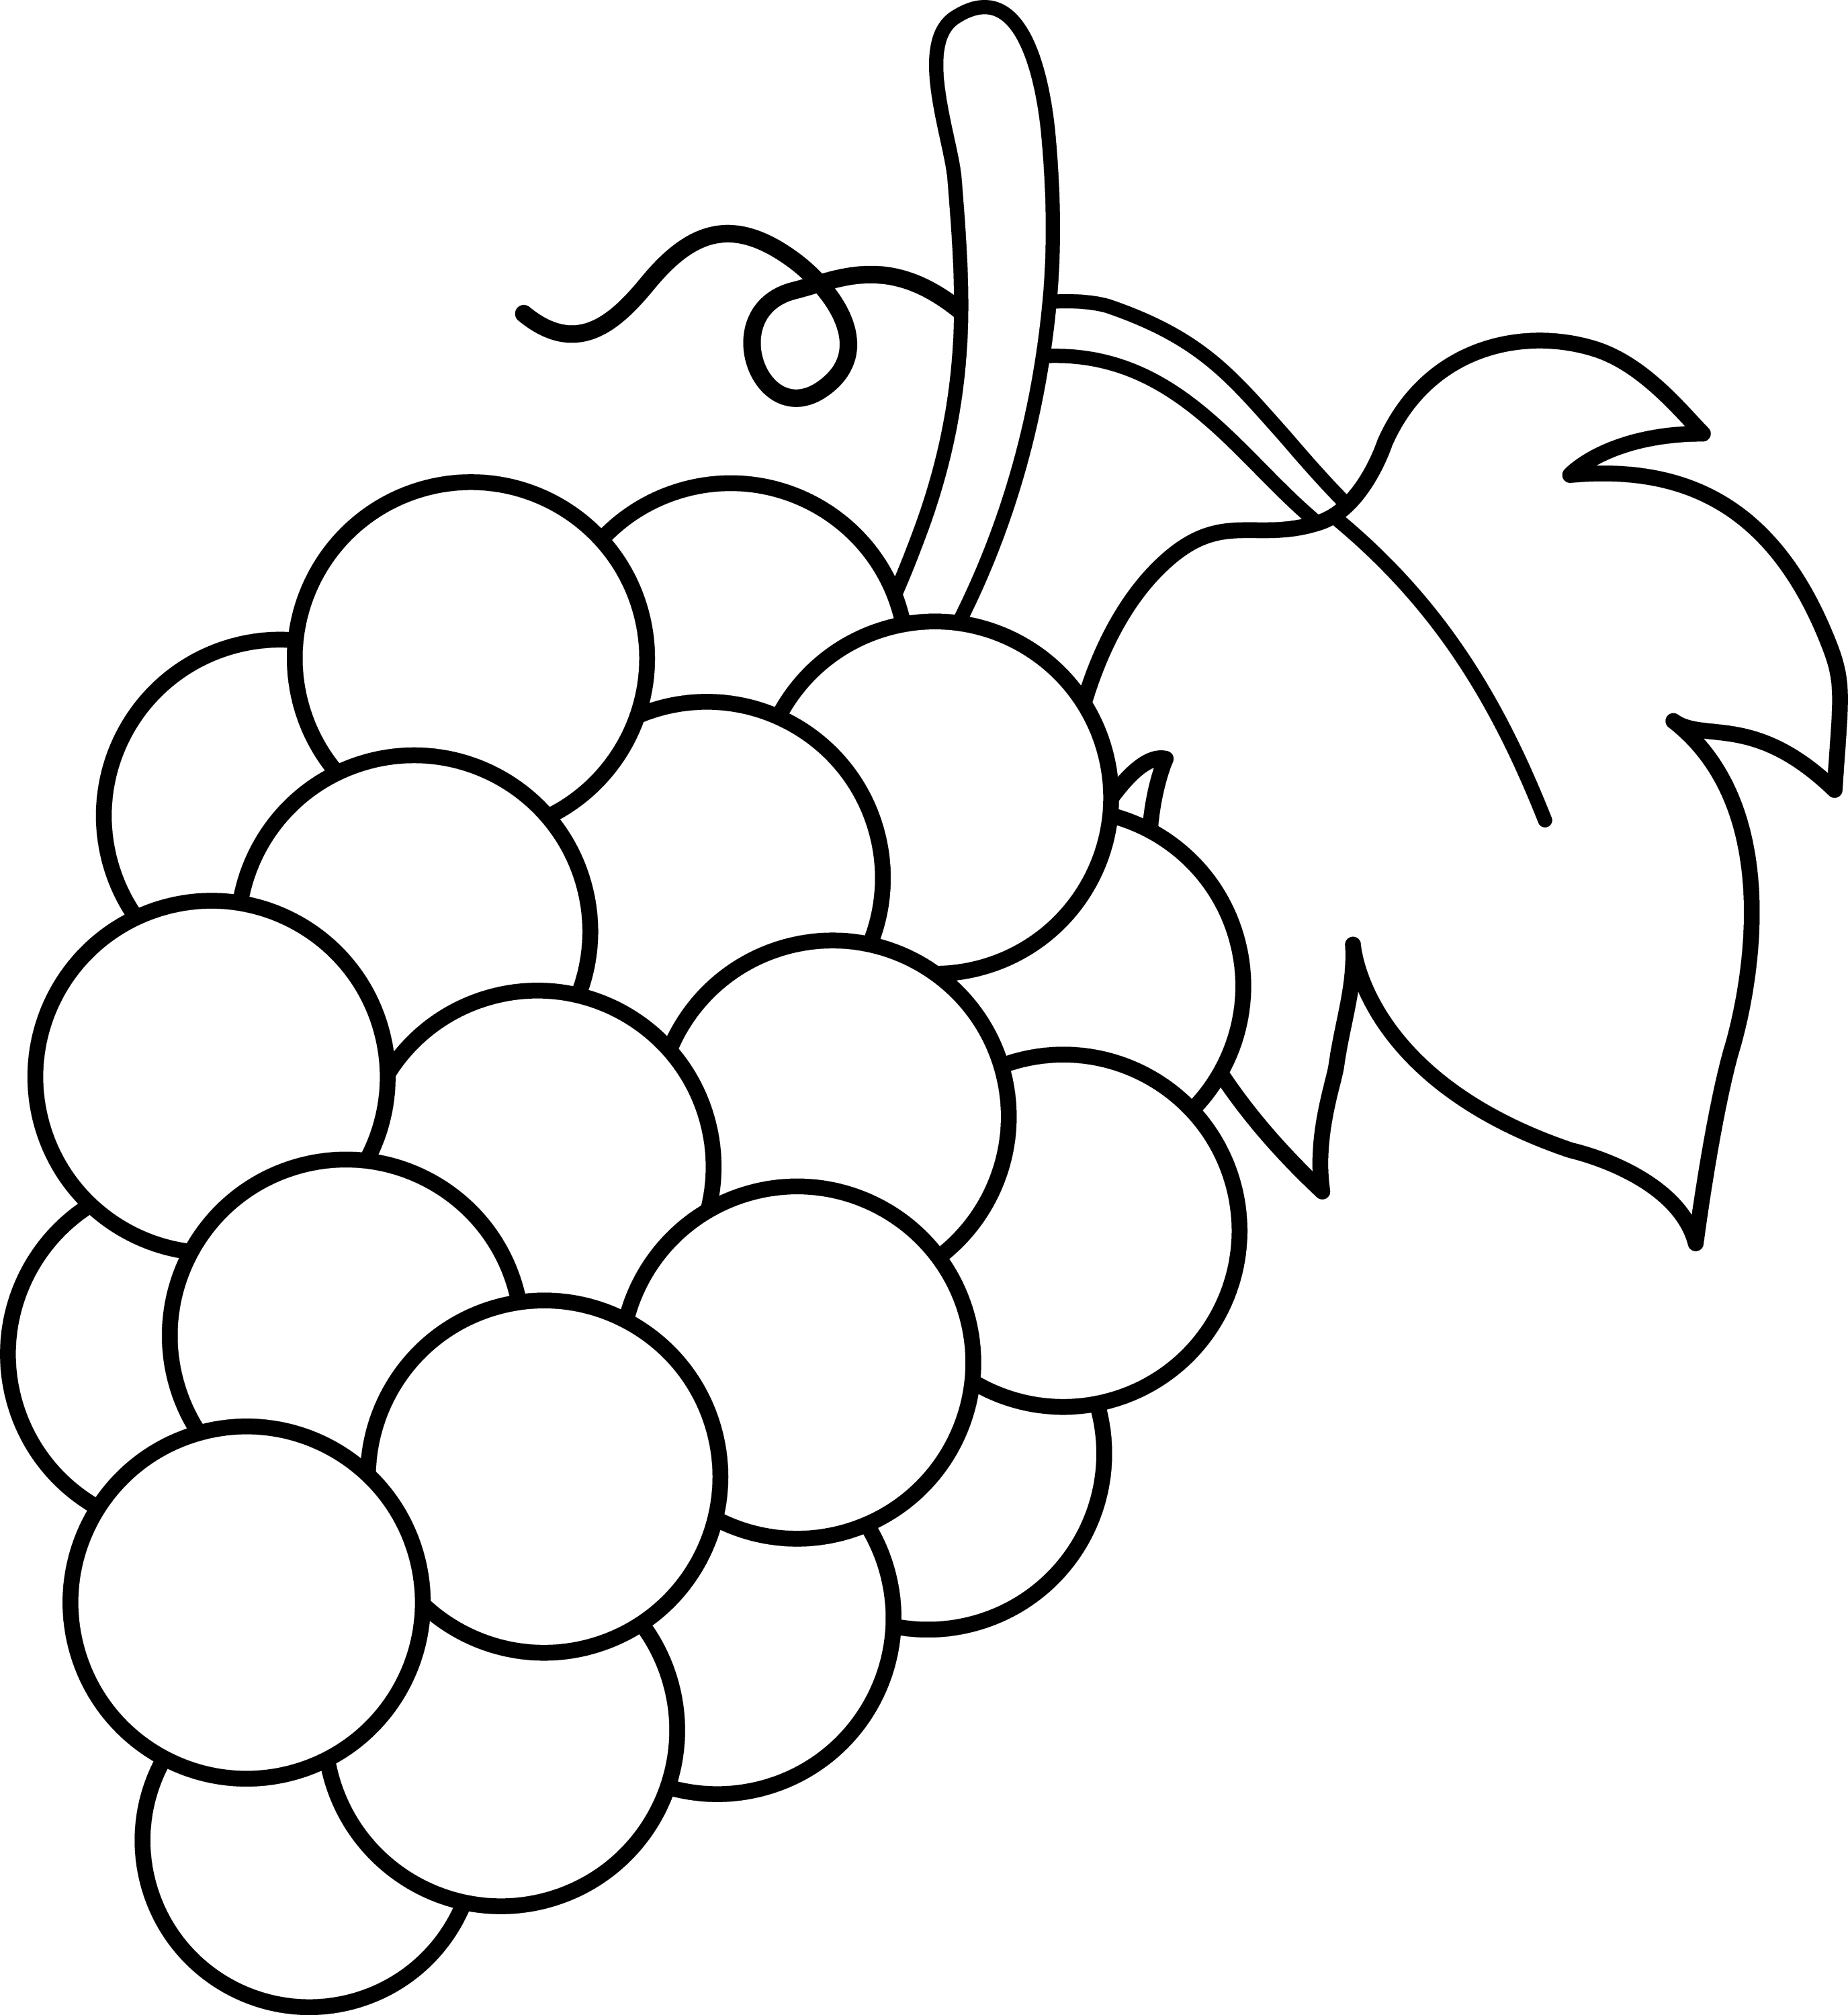 Grapes Black and White Lineart - Free Clip Art